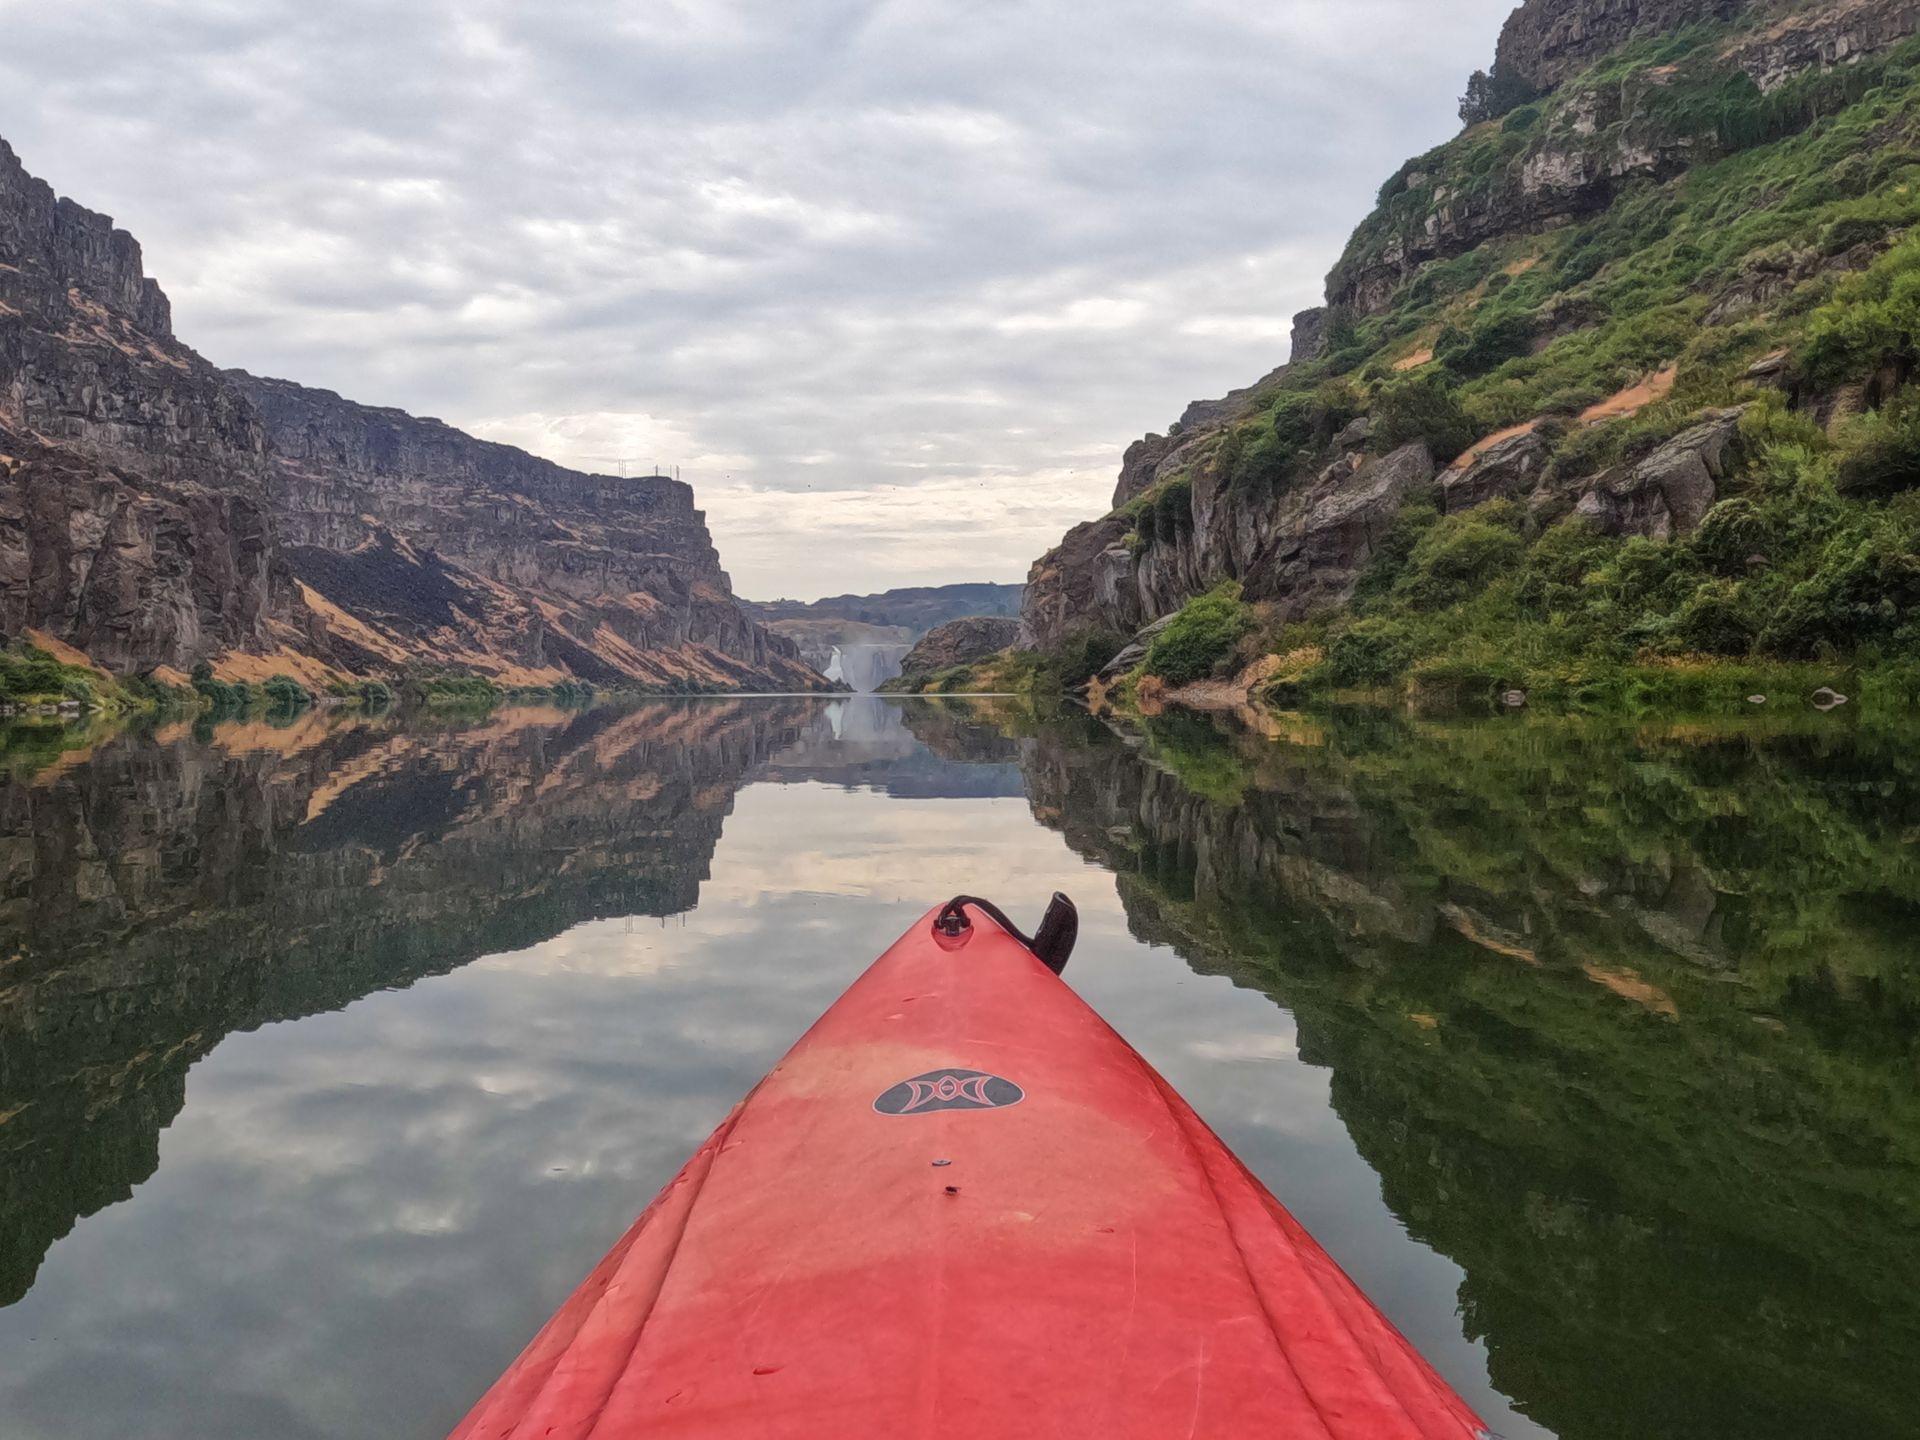 Looking out at Shoshone Falls in the distance while kayaking on the Snake River.